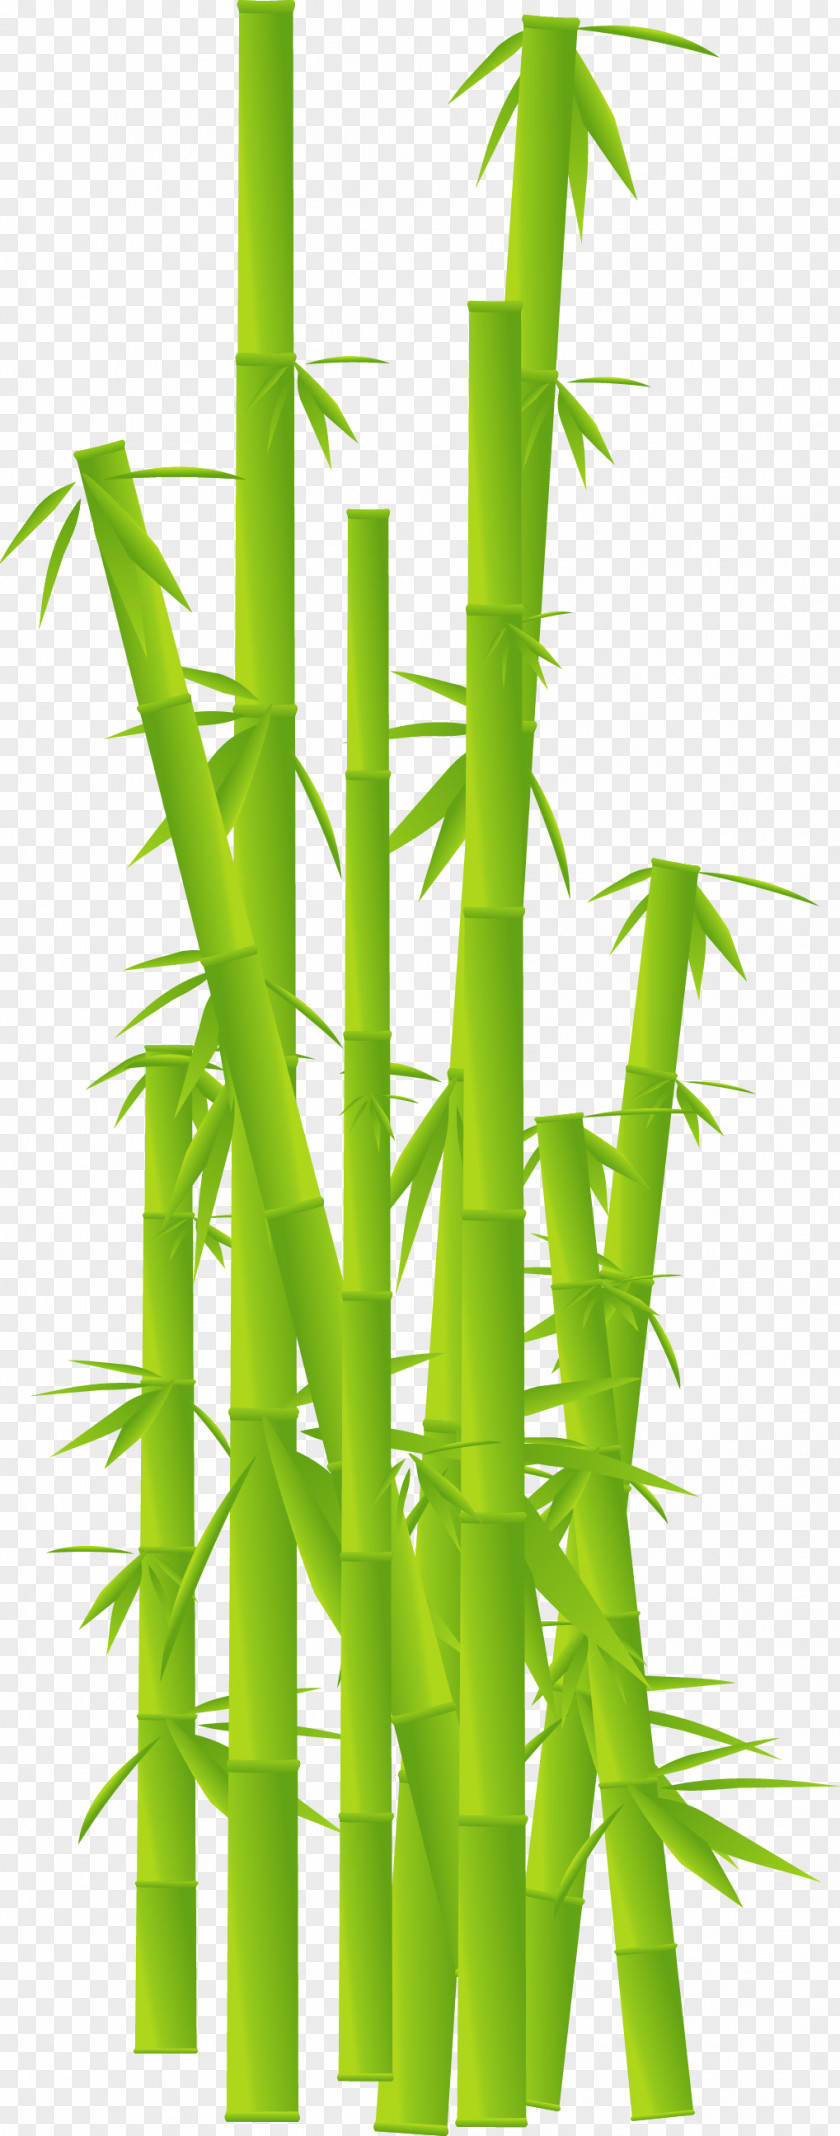 Leaf Tropical Woody Bamboos Plant Stem Clip Art PNG